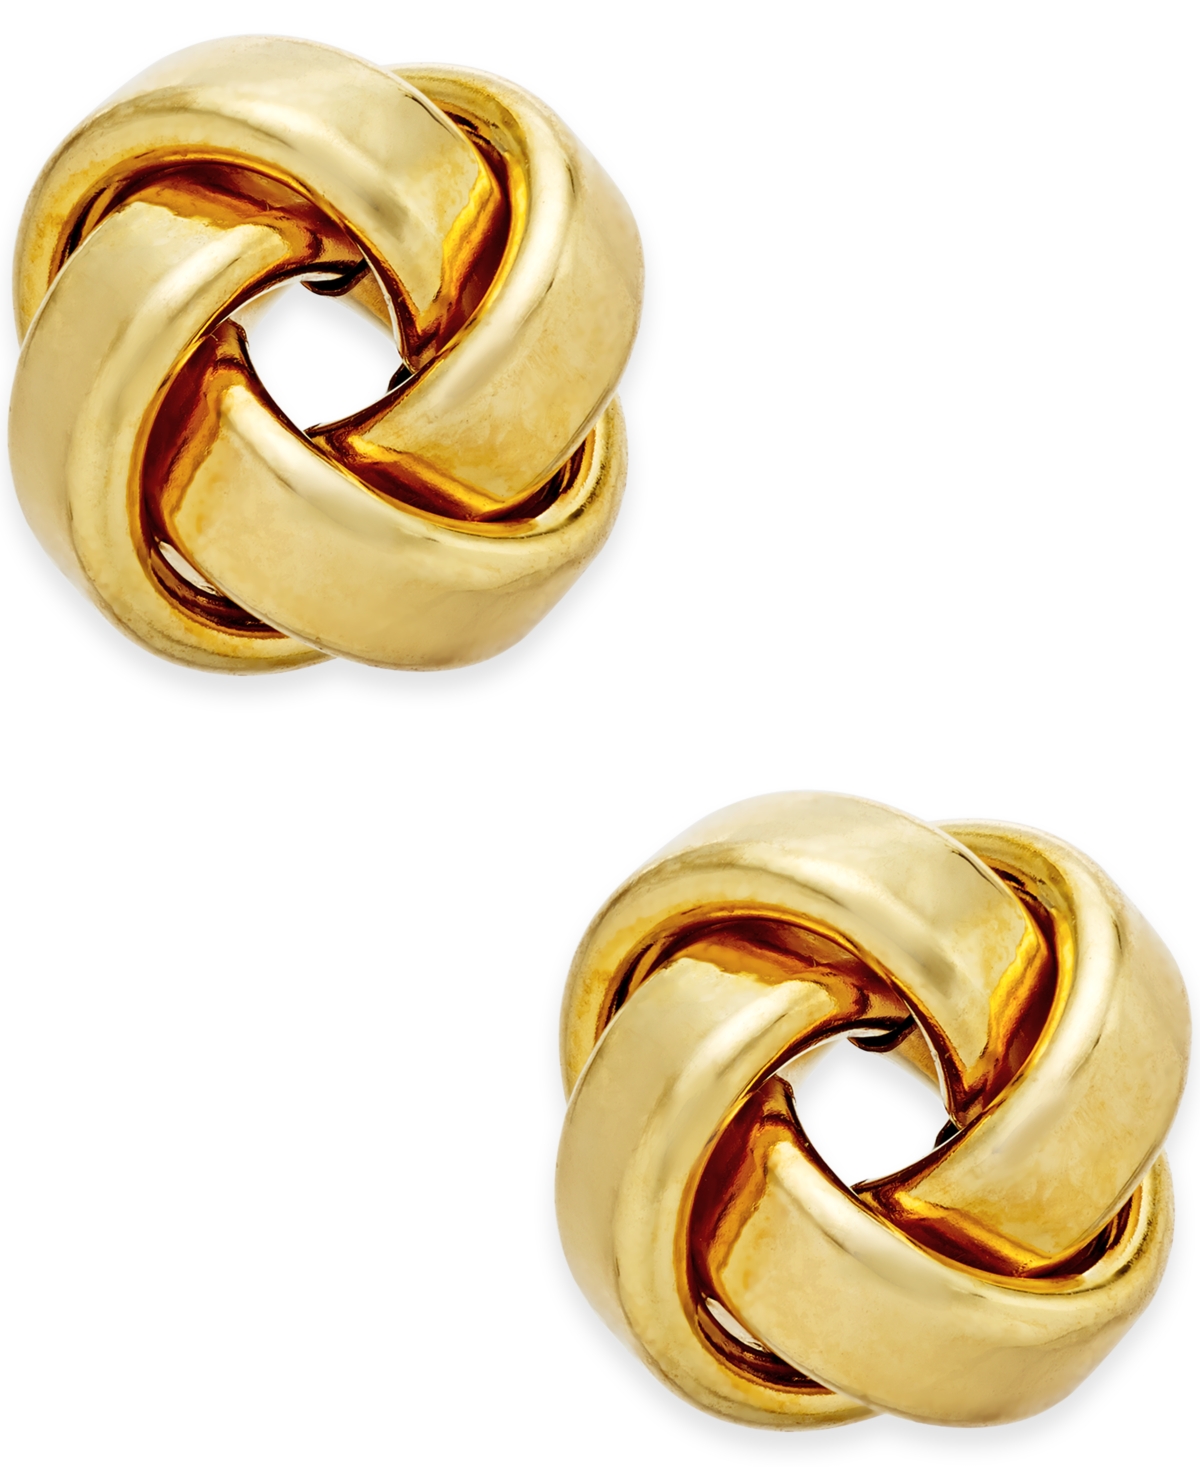 Love Knot Stud Earrings in 14k Gold or White Gold - Yellow Gold